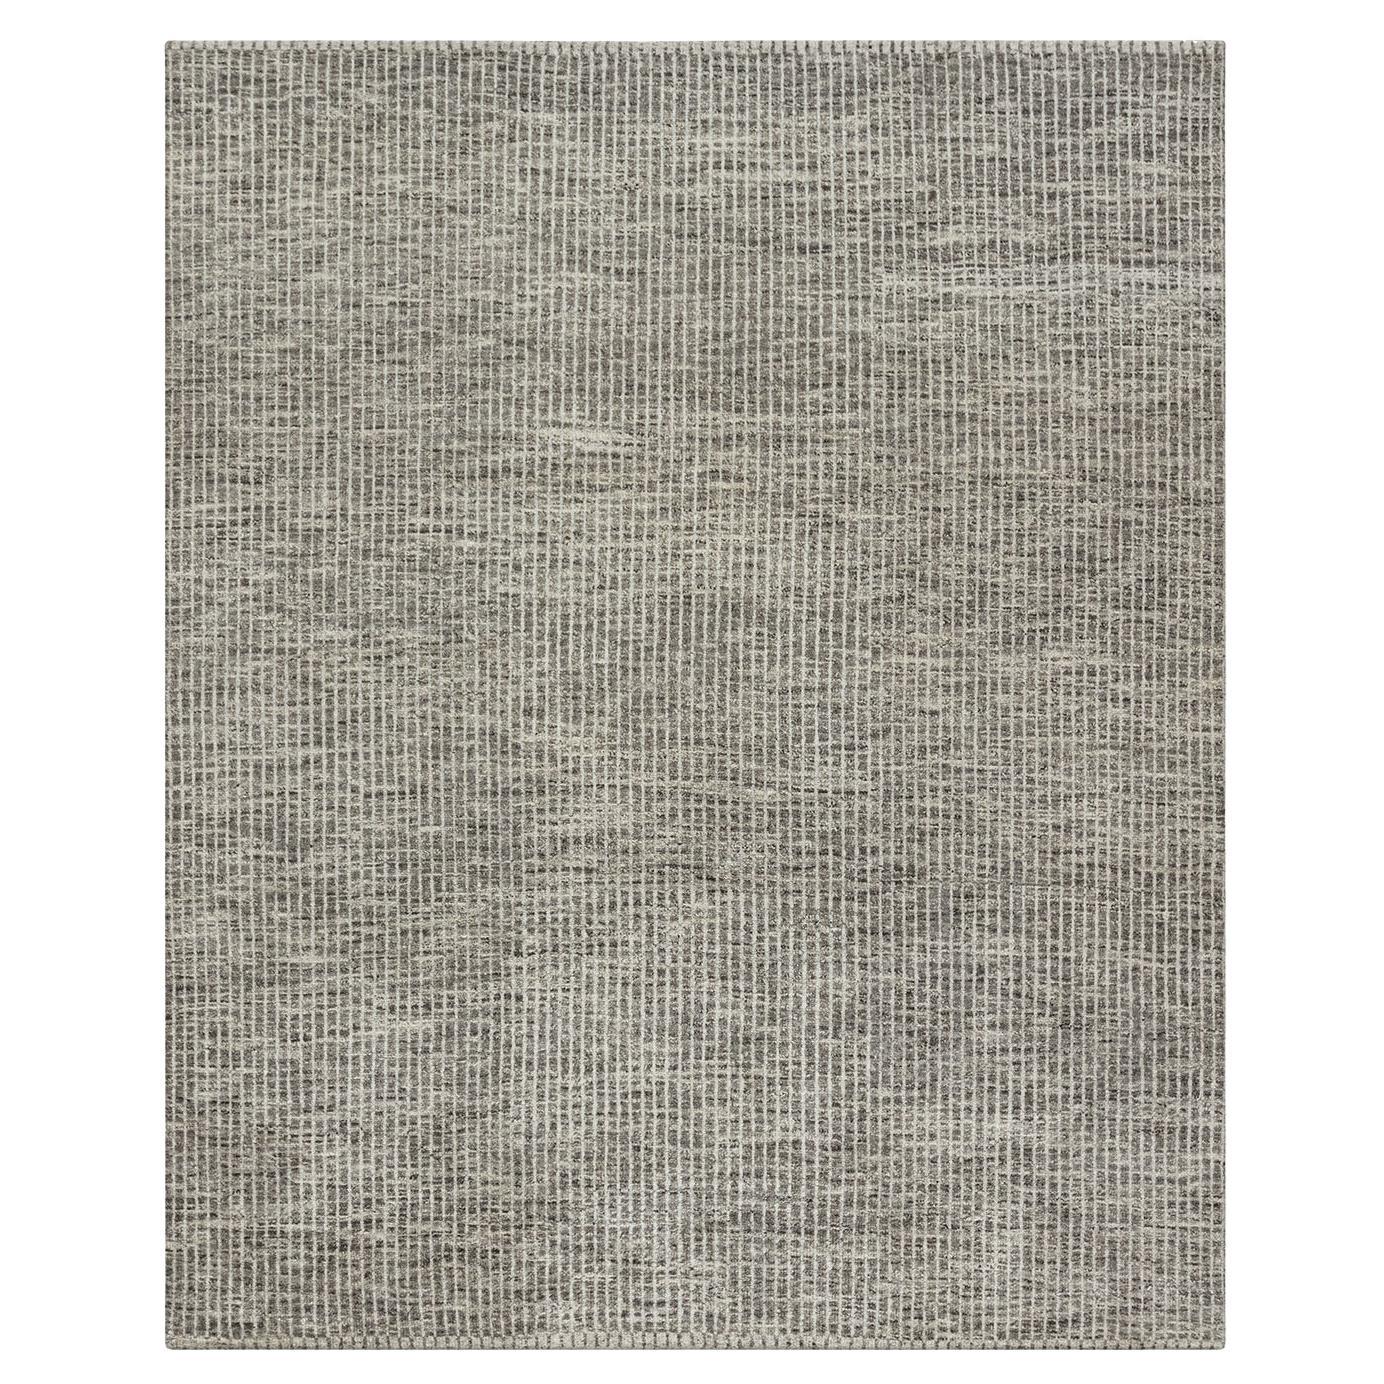 Organic Night Contemporary Rug  9'10x12'10 For Sale